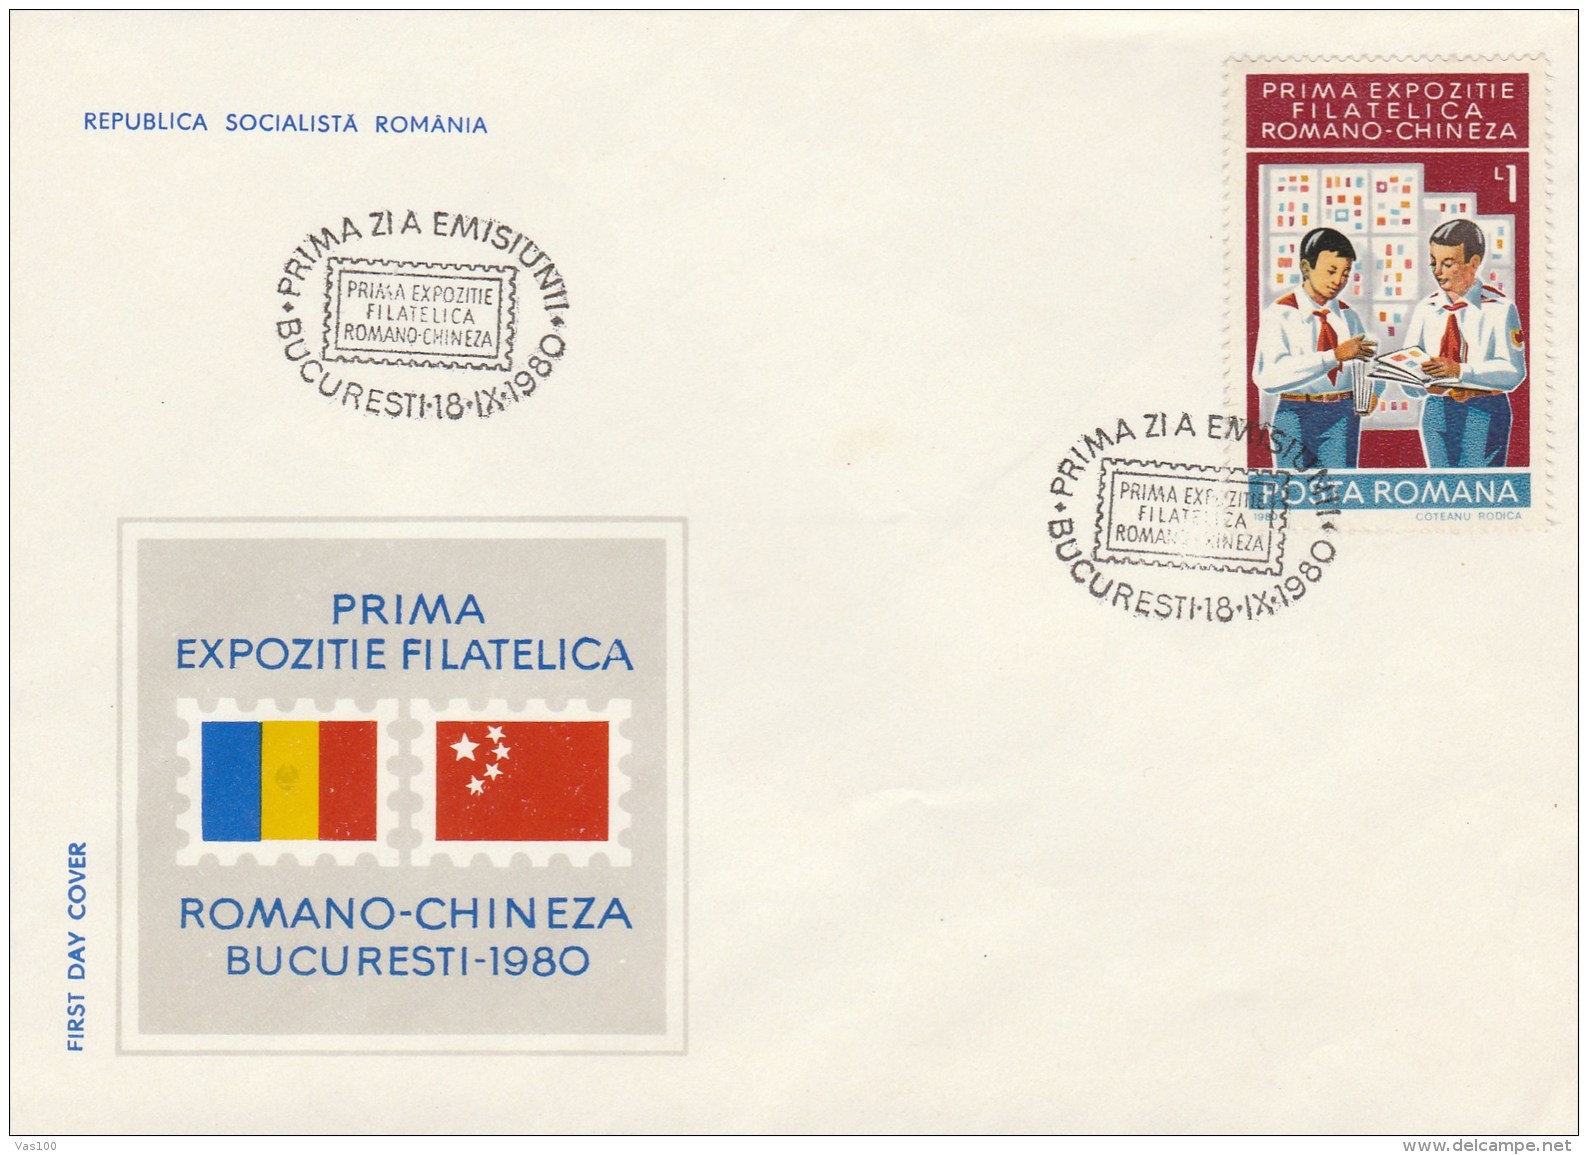 #BV3588  FIRST ROMANIAN-CHINESE PHILATELY EXPOSITION, BOY SCOUT, PIONIEER, COVERS FDC, 1980, ROMANIA. - FDC